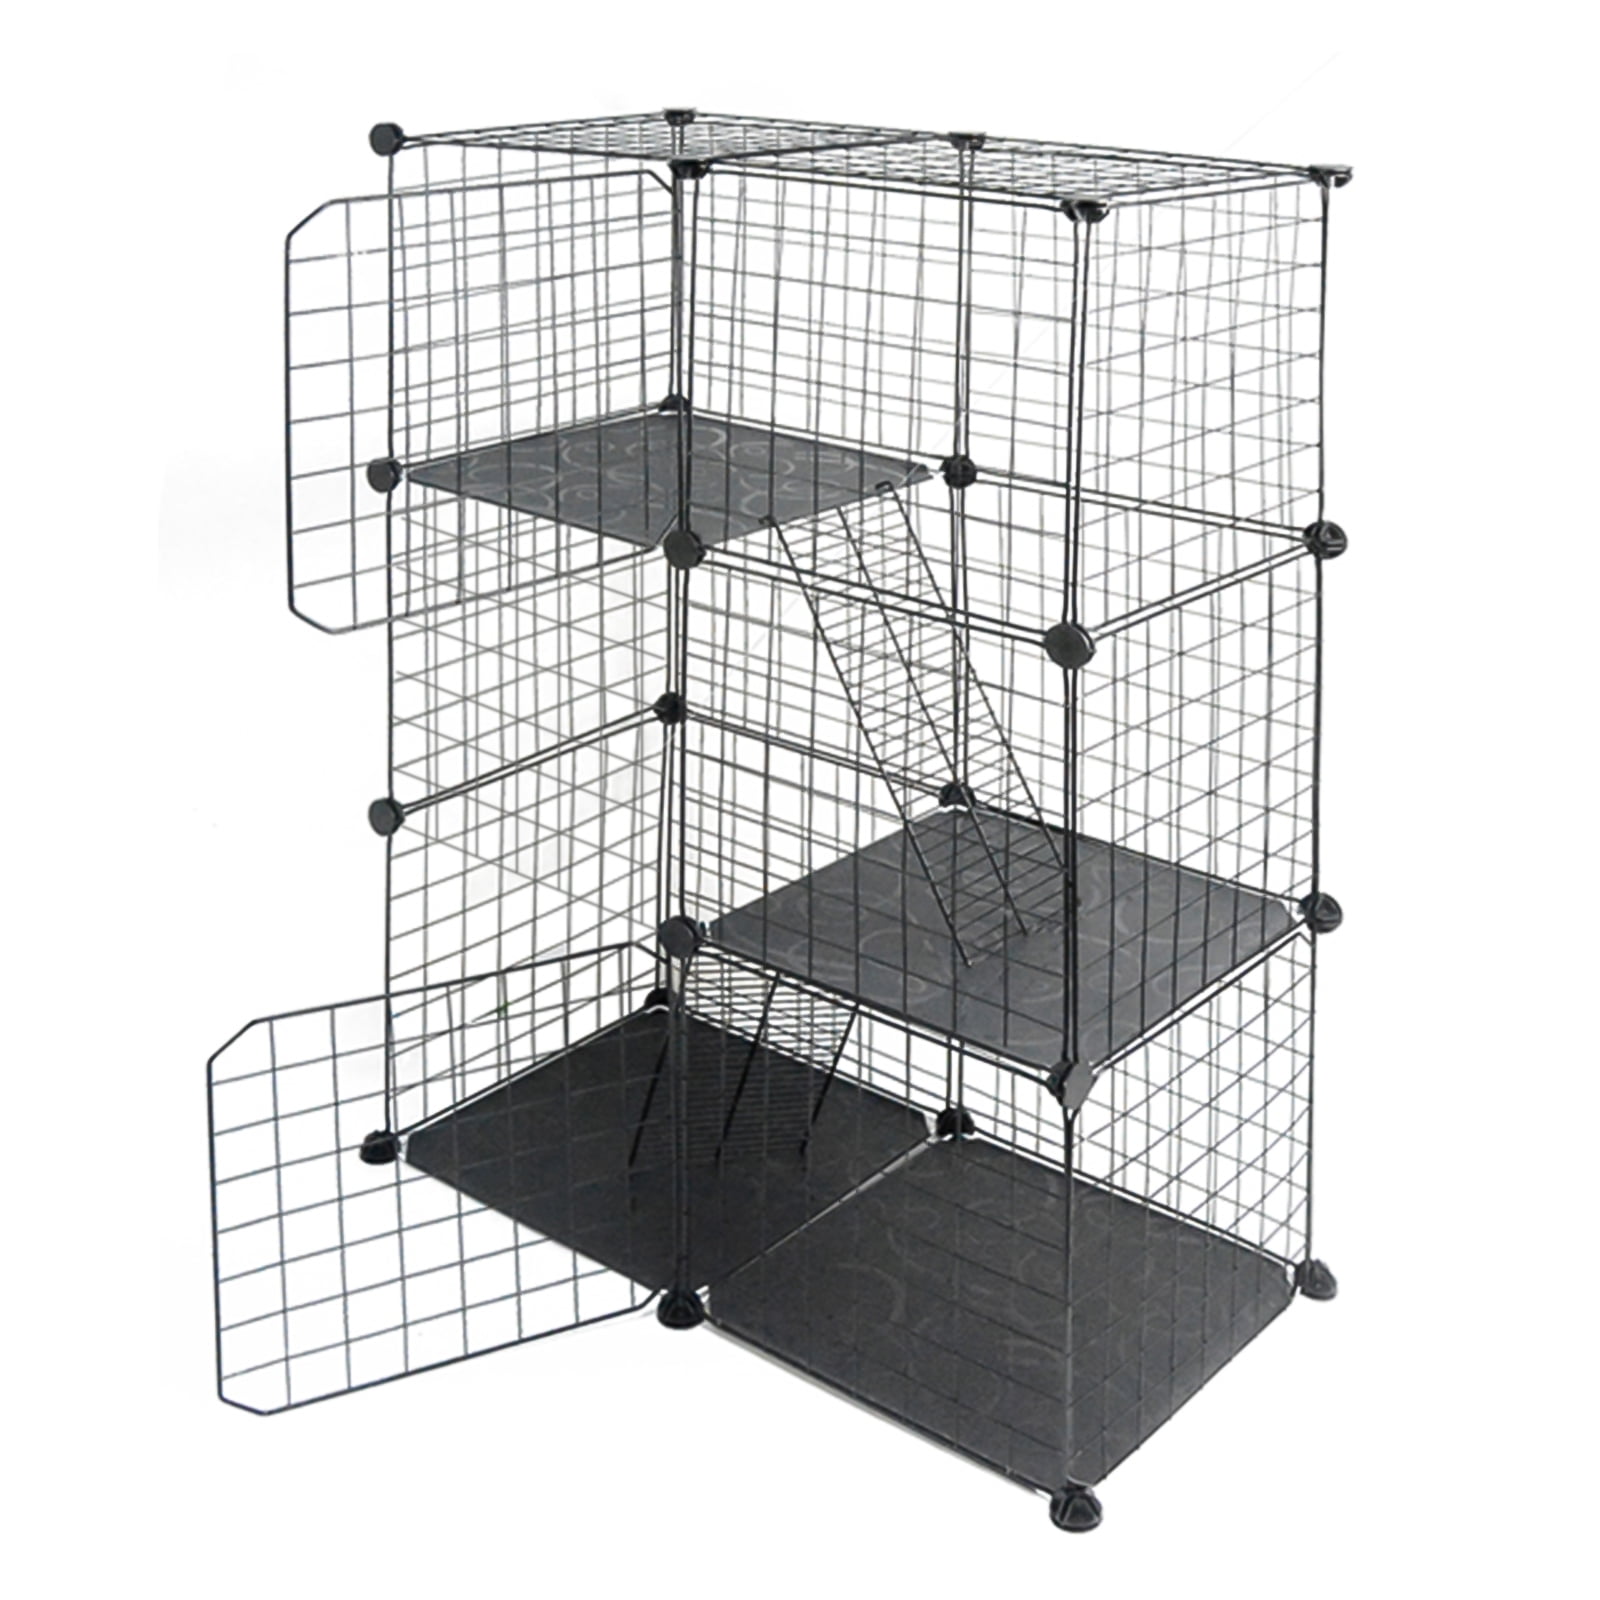 How to Make Cage Mats or Kennel Pads for Cats - FeltMagnet